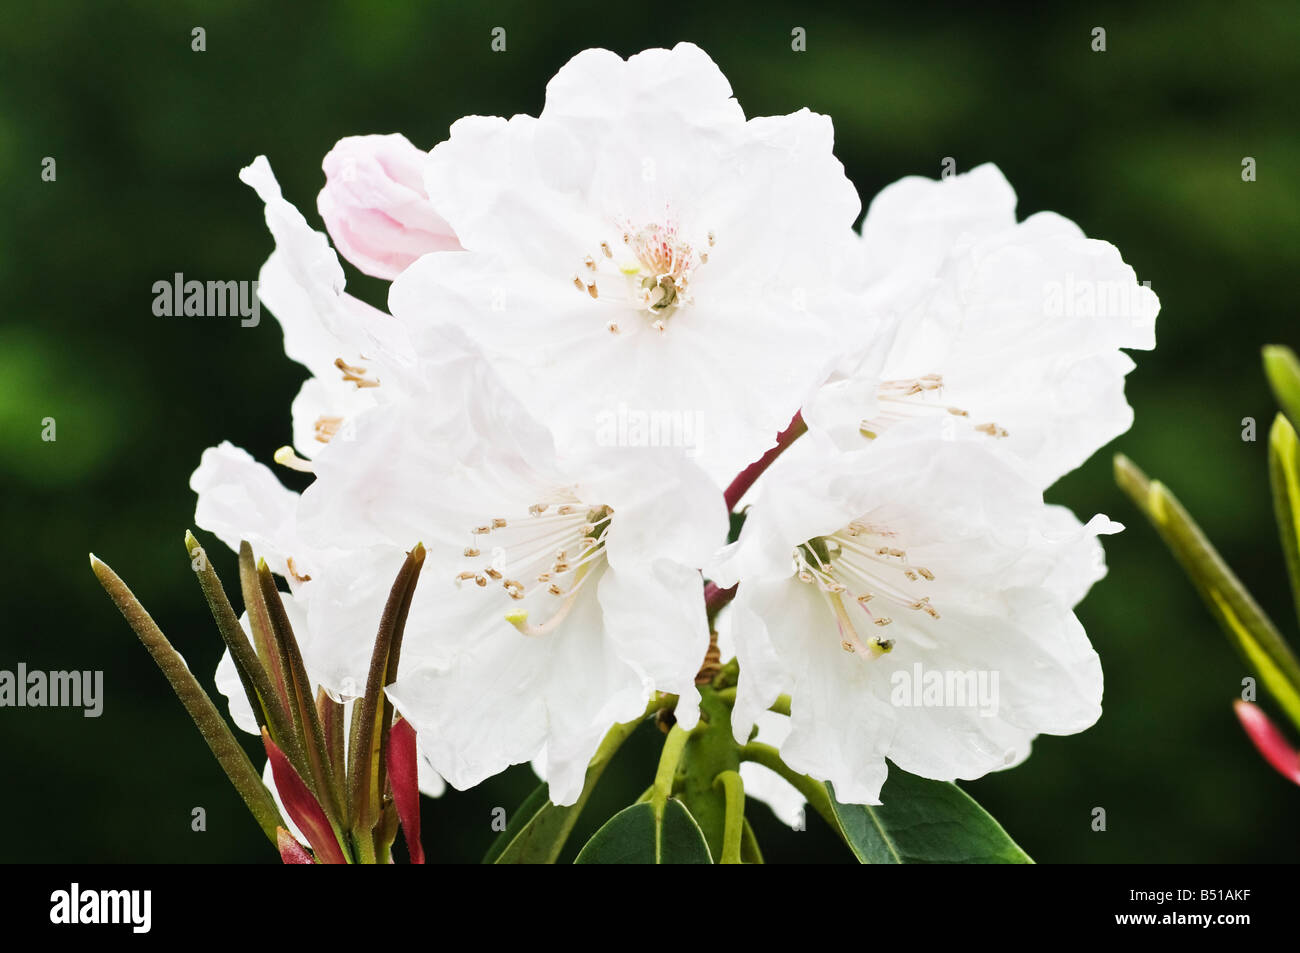 Rhododendron Anstand Stockfoto